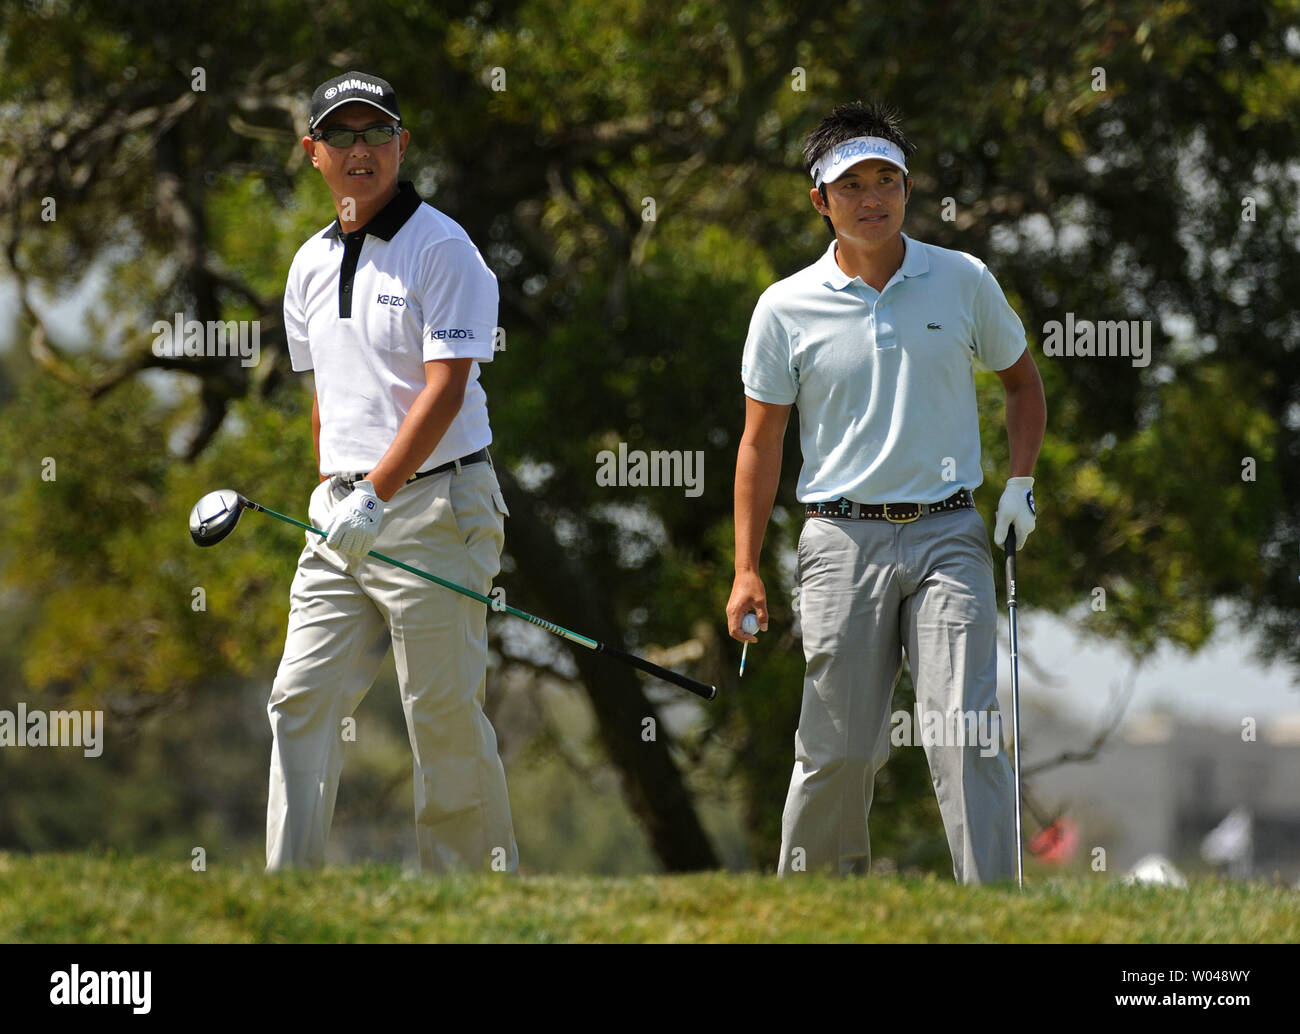 Japanese golfers Toru Taniguchi (L) and Ryuji Imada watches Taniguchi's drive off of the 15th tee box during a practice round prior to the 2008 U.S. Open at Torrey Pines Golf Course in San Diego on June 11, 2008. (UPI Photo/Kevin Dietsch) Stock Photo